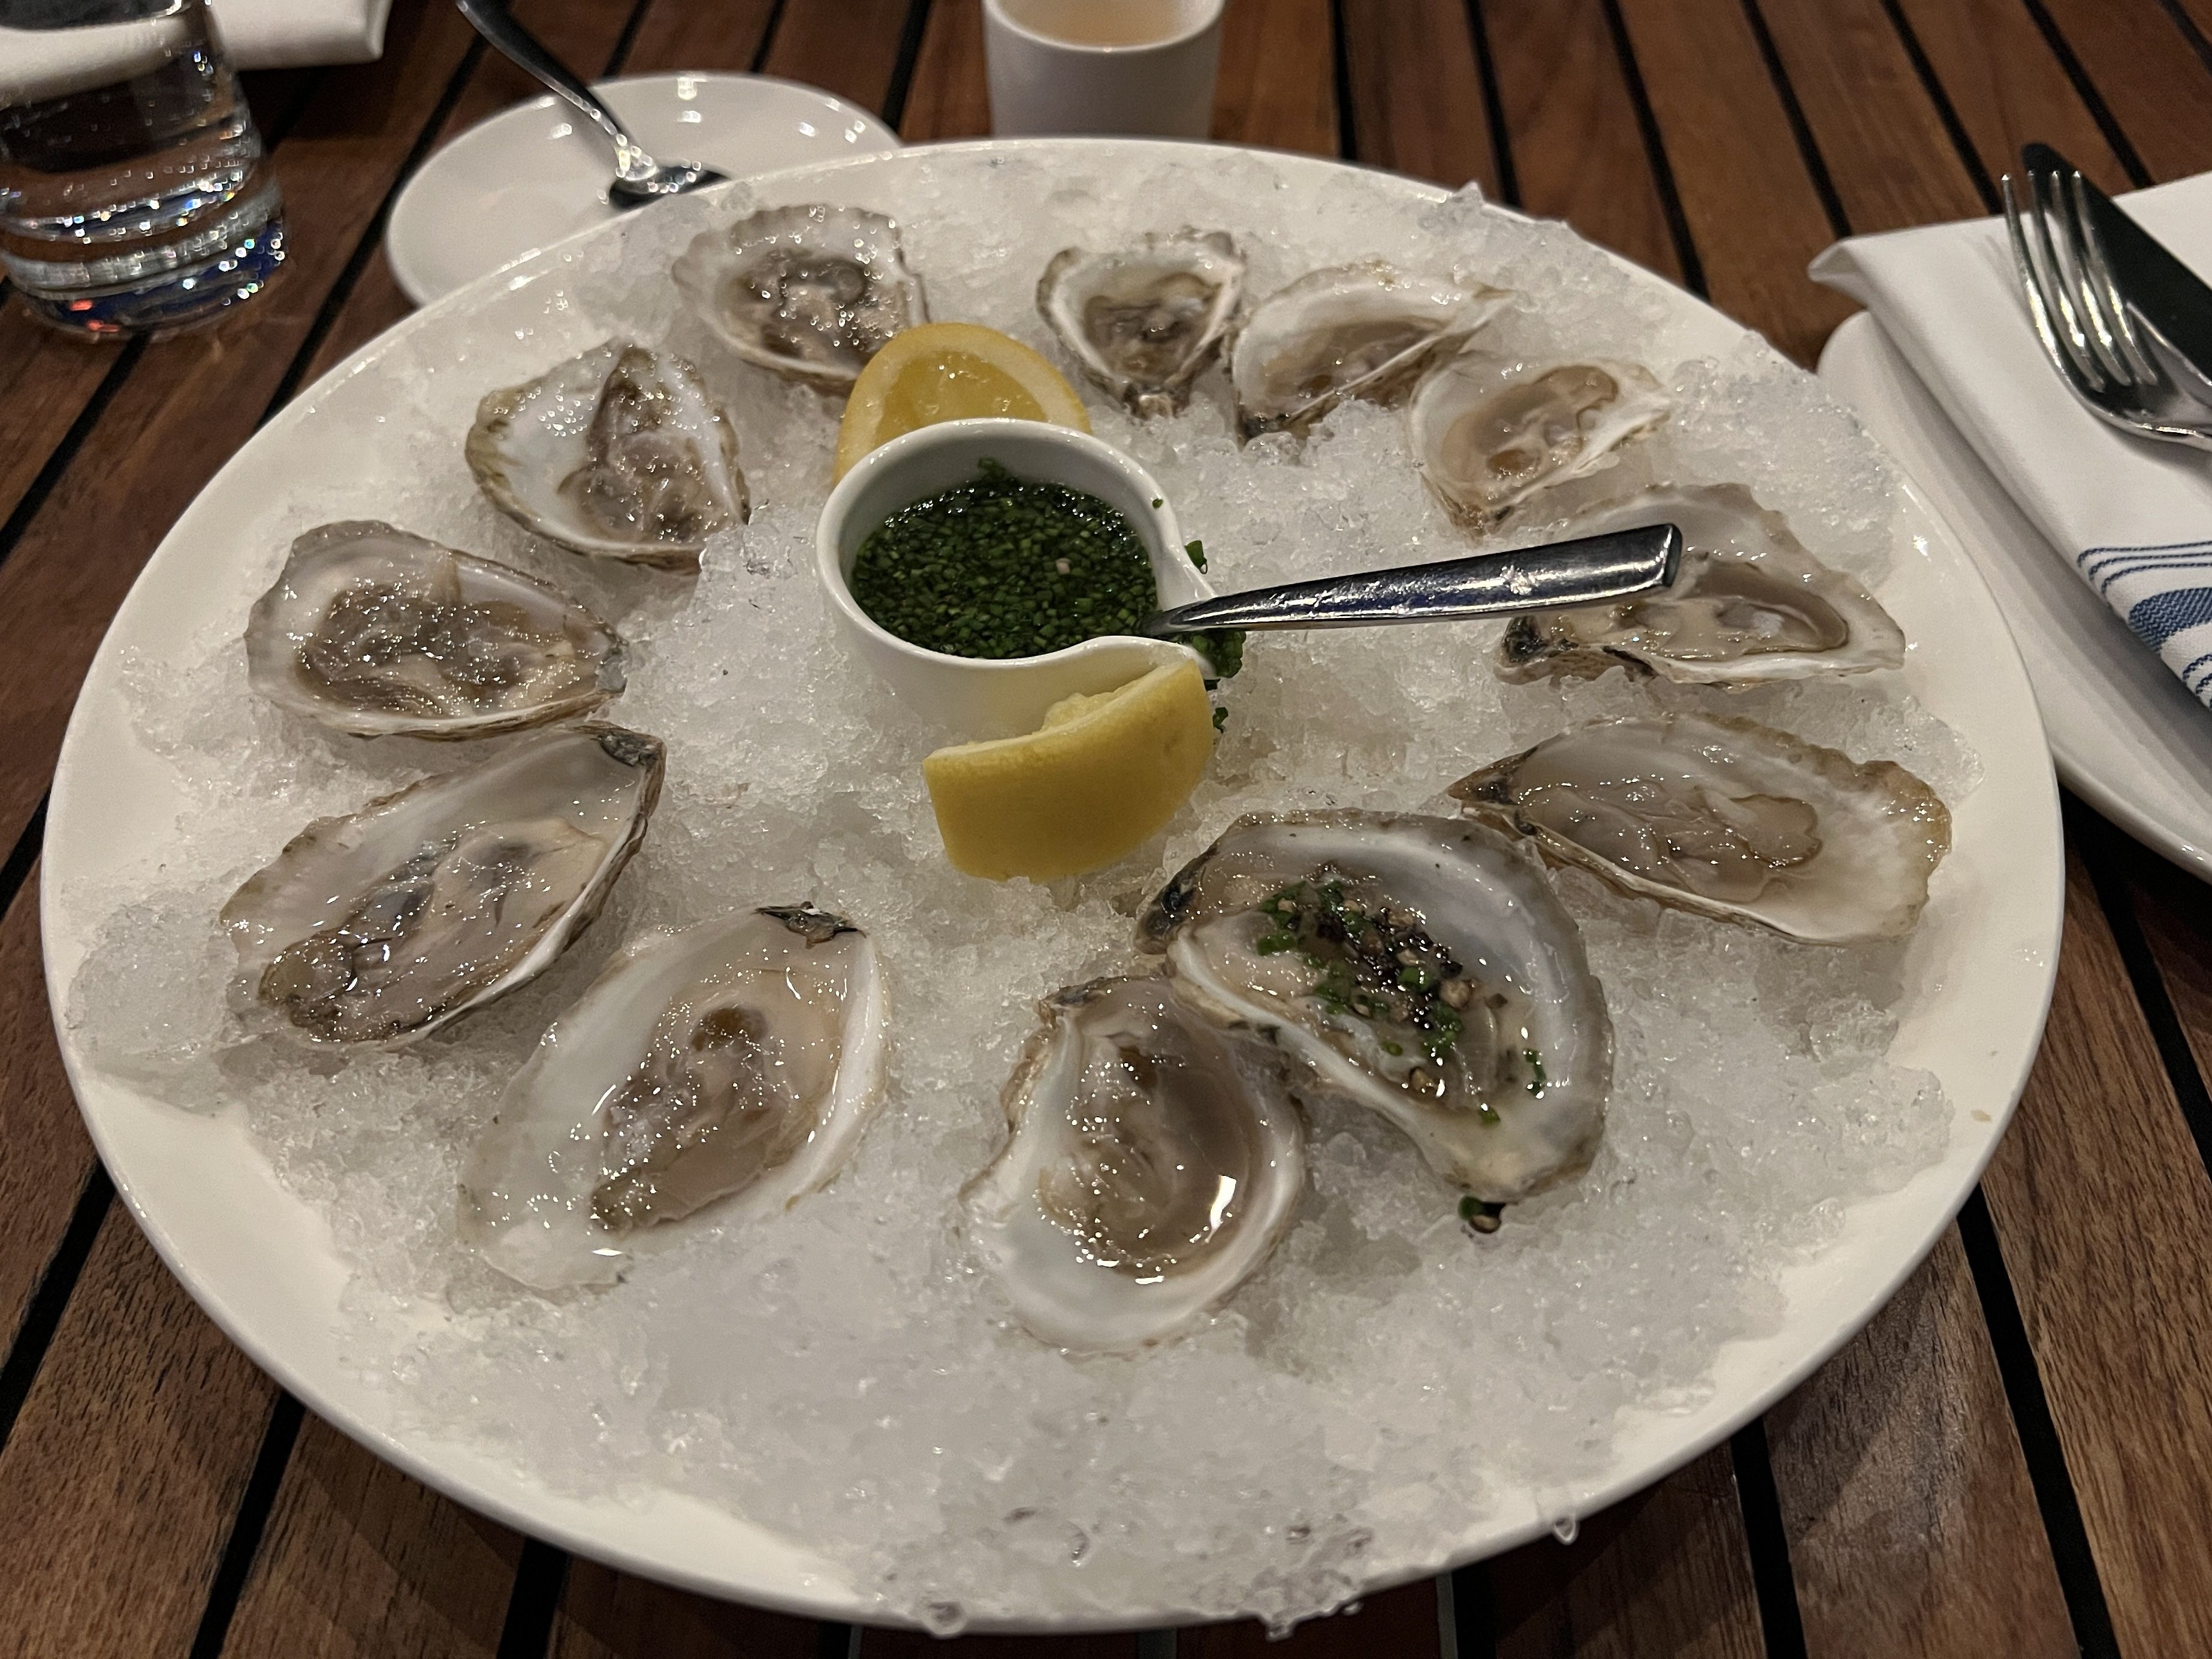 Selden Standard's oysters taste fresh and clean, with a dark mignonette.